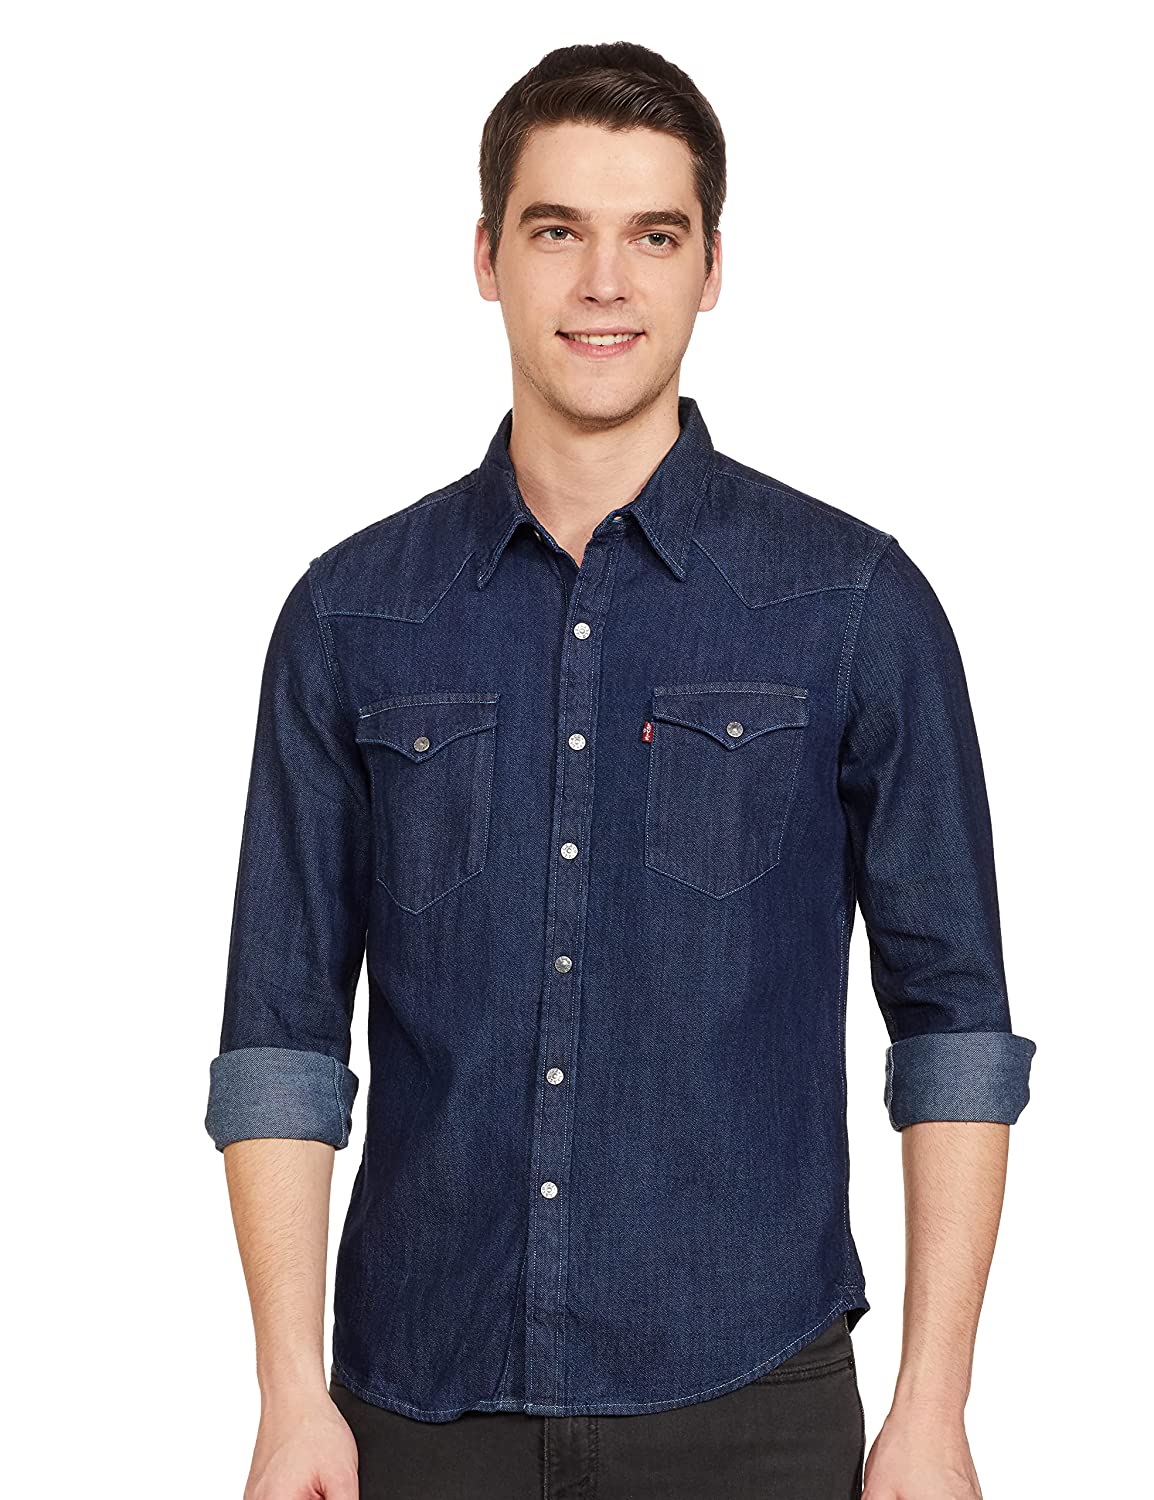 Levi’s Branded Shirt For Men In India - Promo Codes, Offers, Deals ...